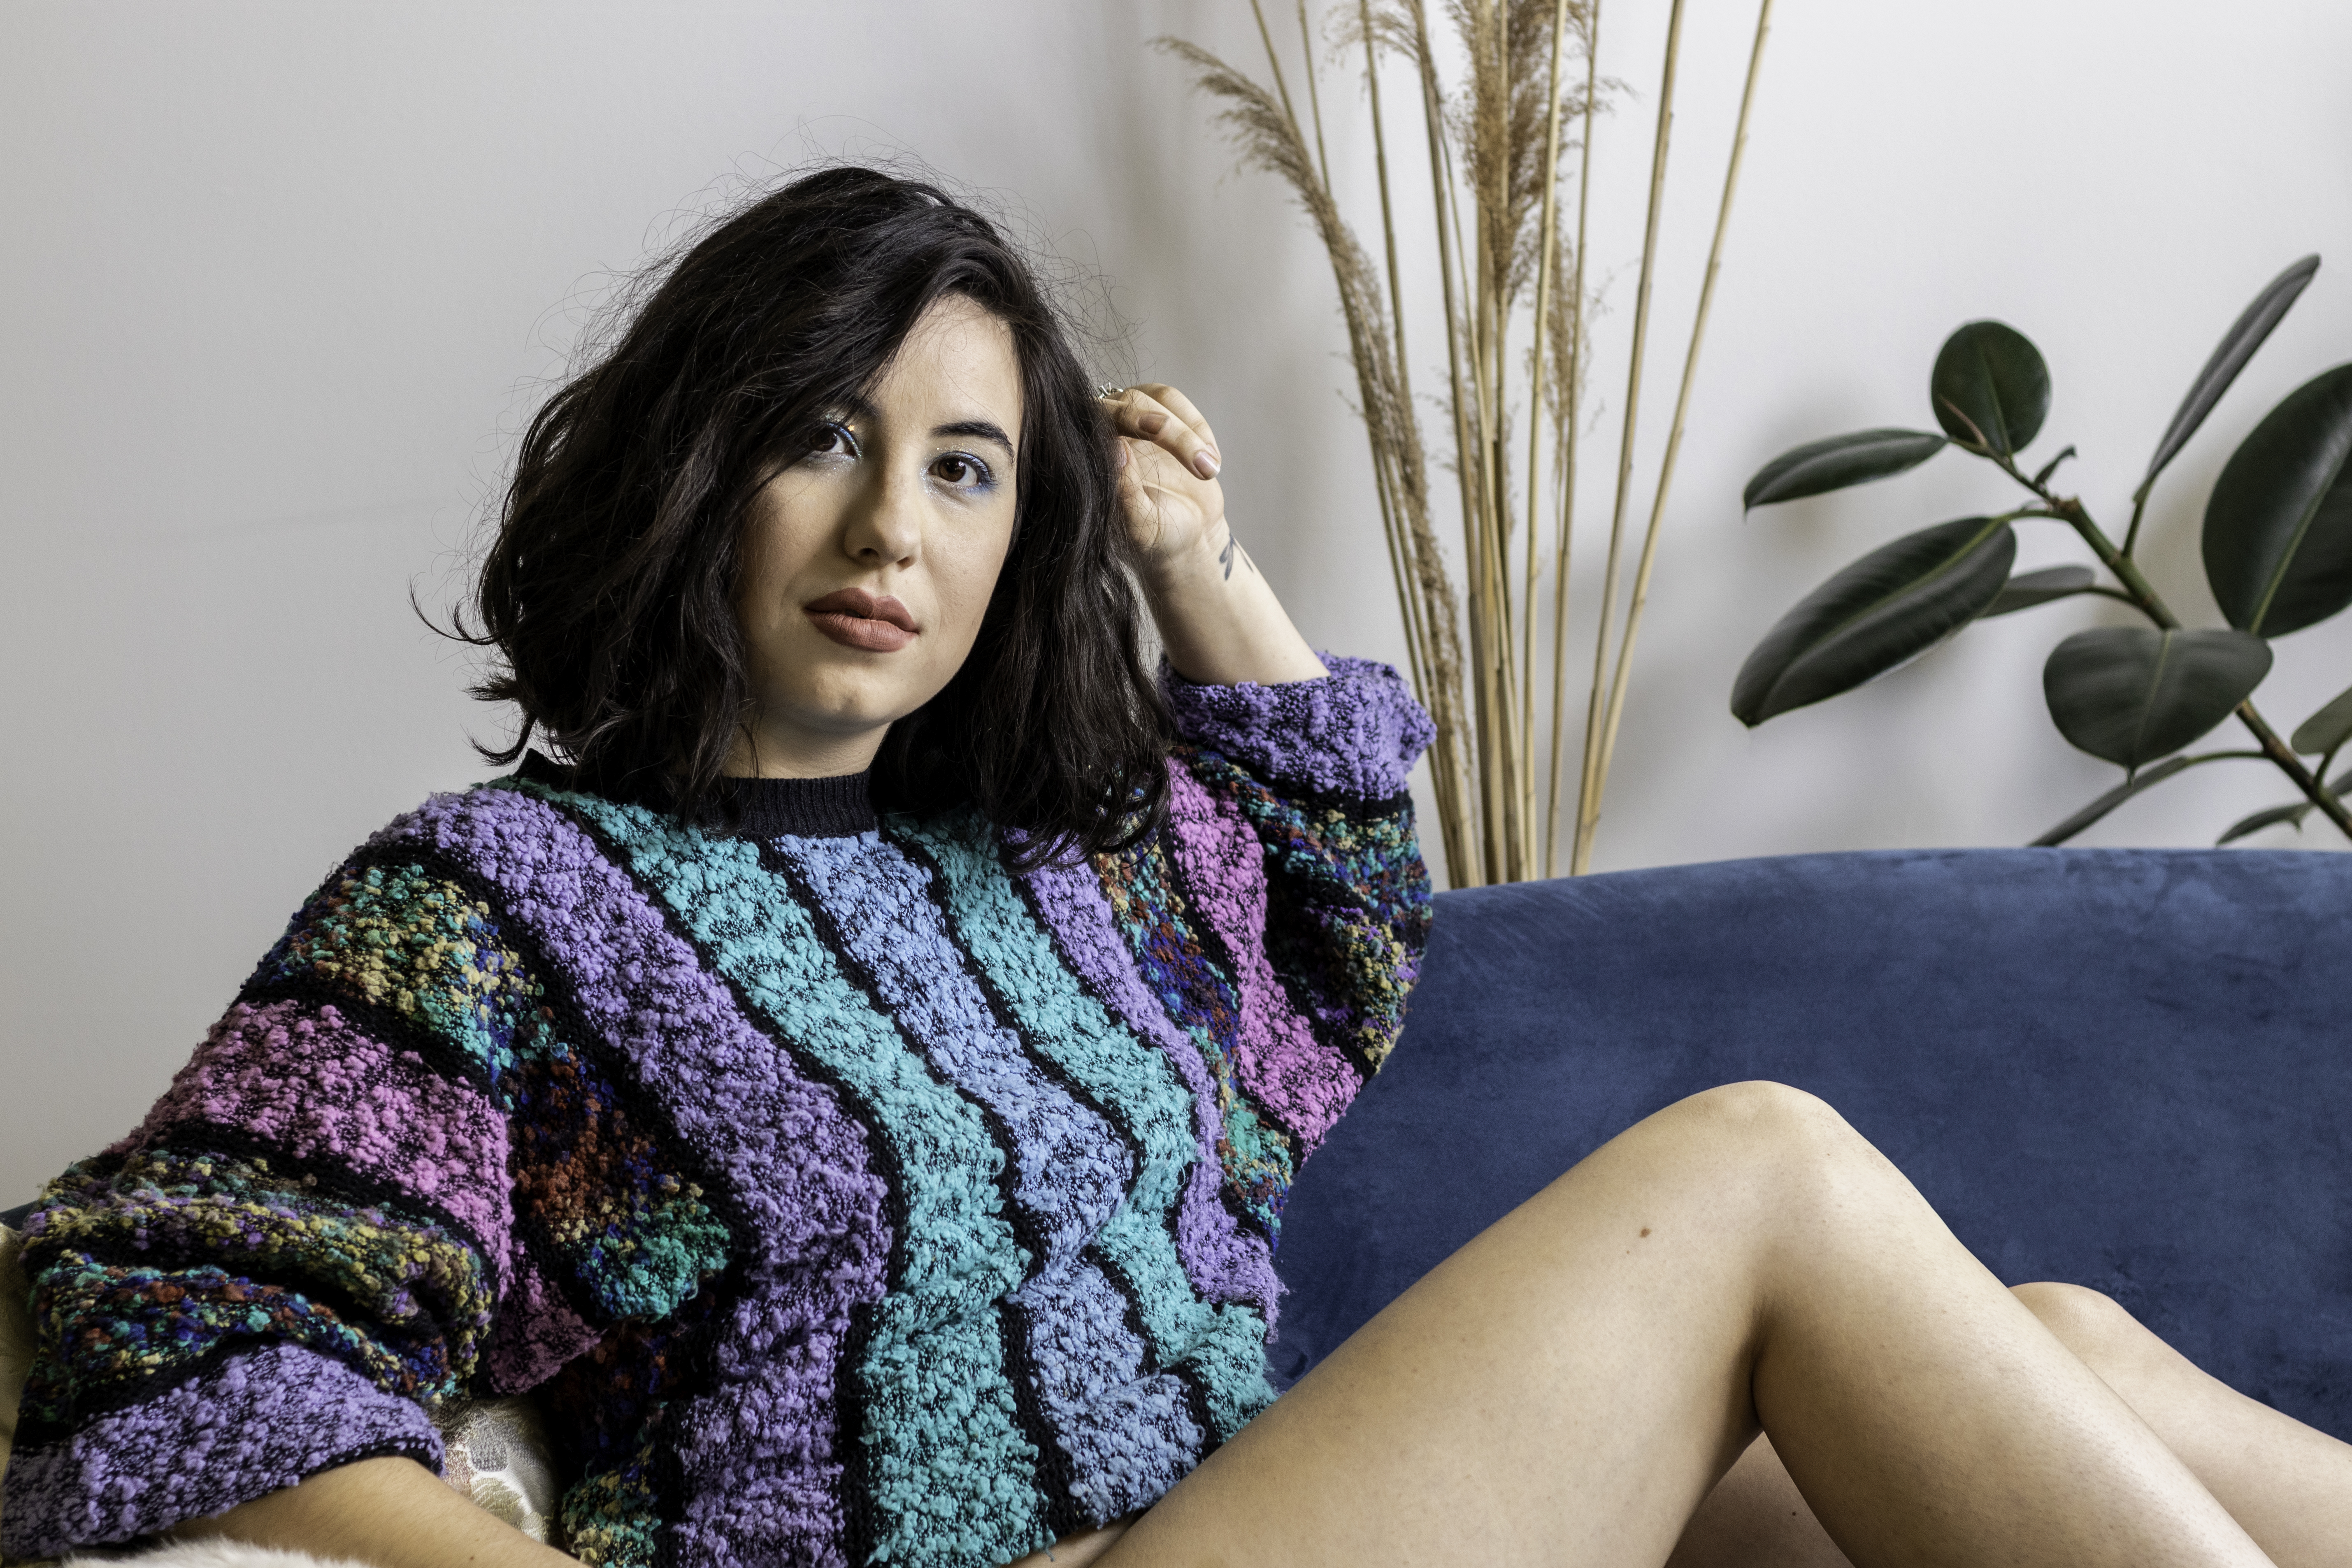 Black-haired woman in a colourful sweater looking at the camera and lounging on a blue velvet couch.